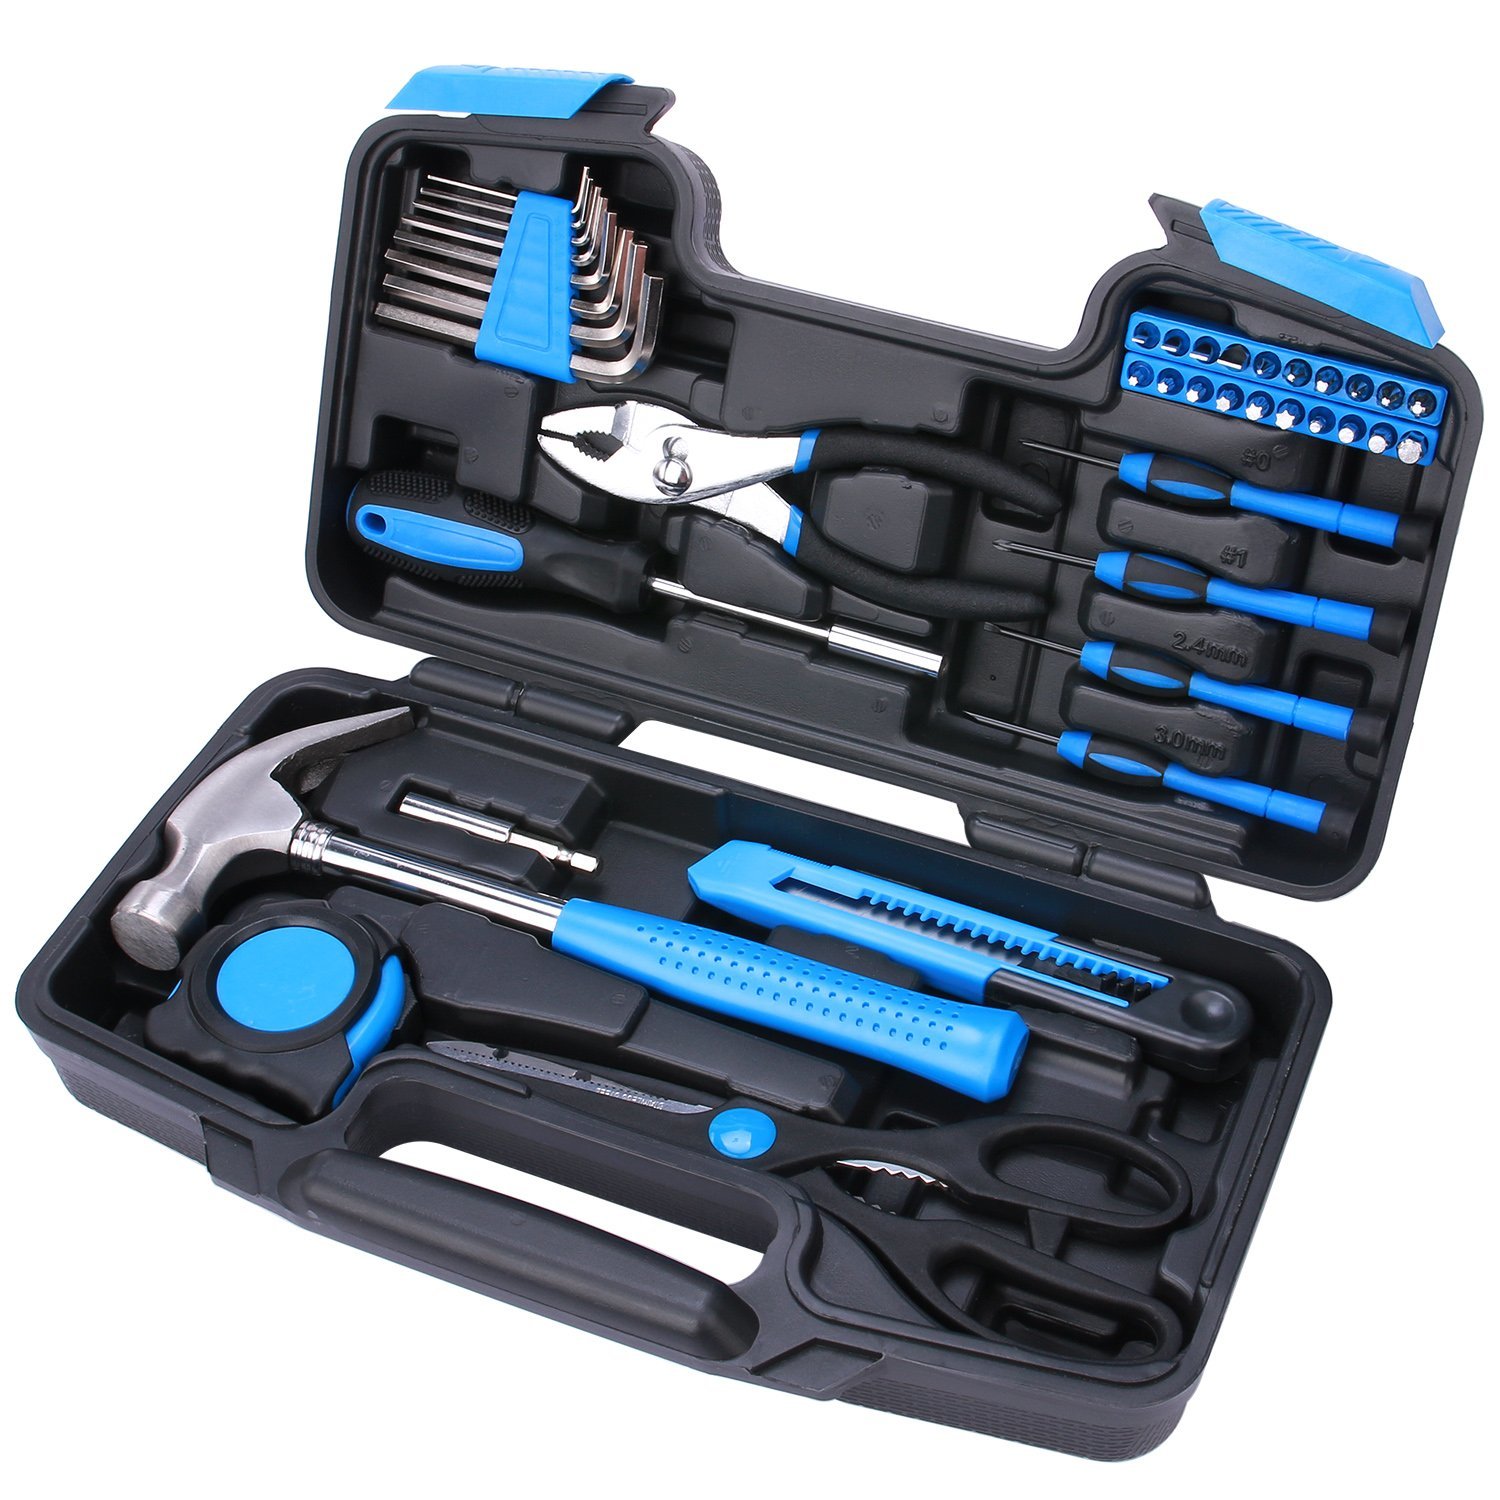 Primary image for 40-Piece All Purpose Household Tool Kit  Includes All Essential Tools For Home, 